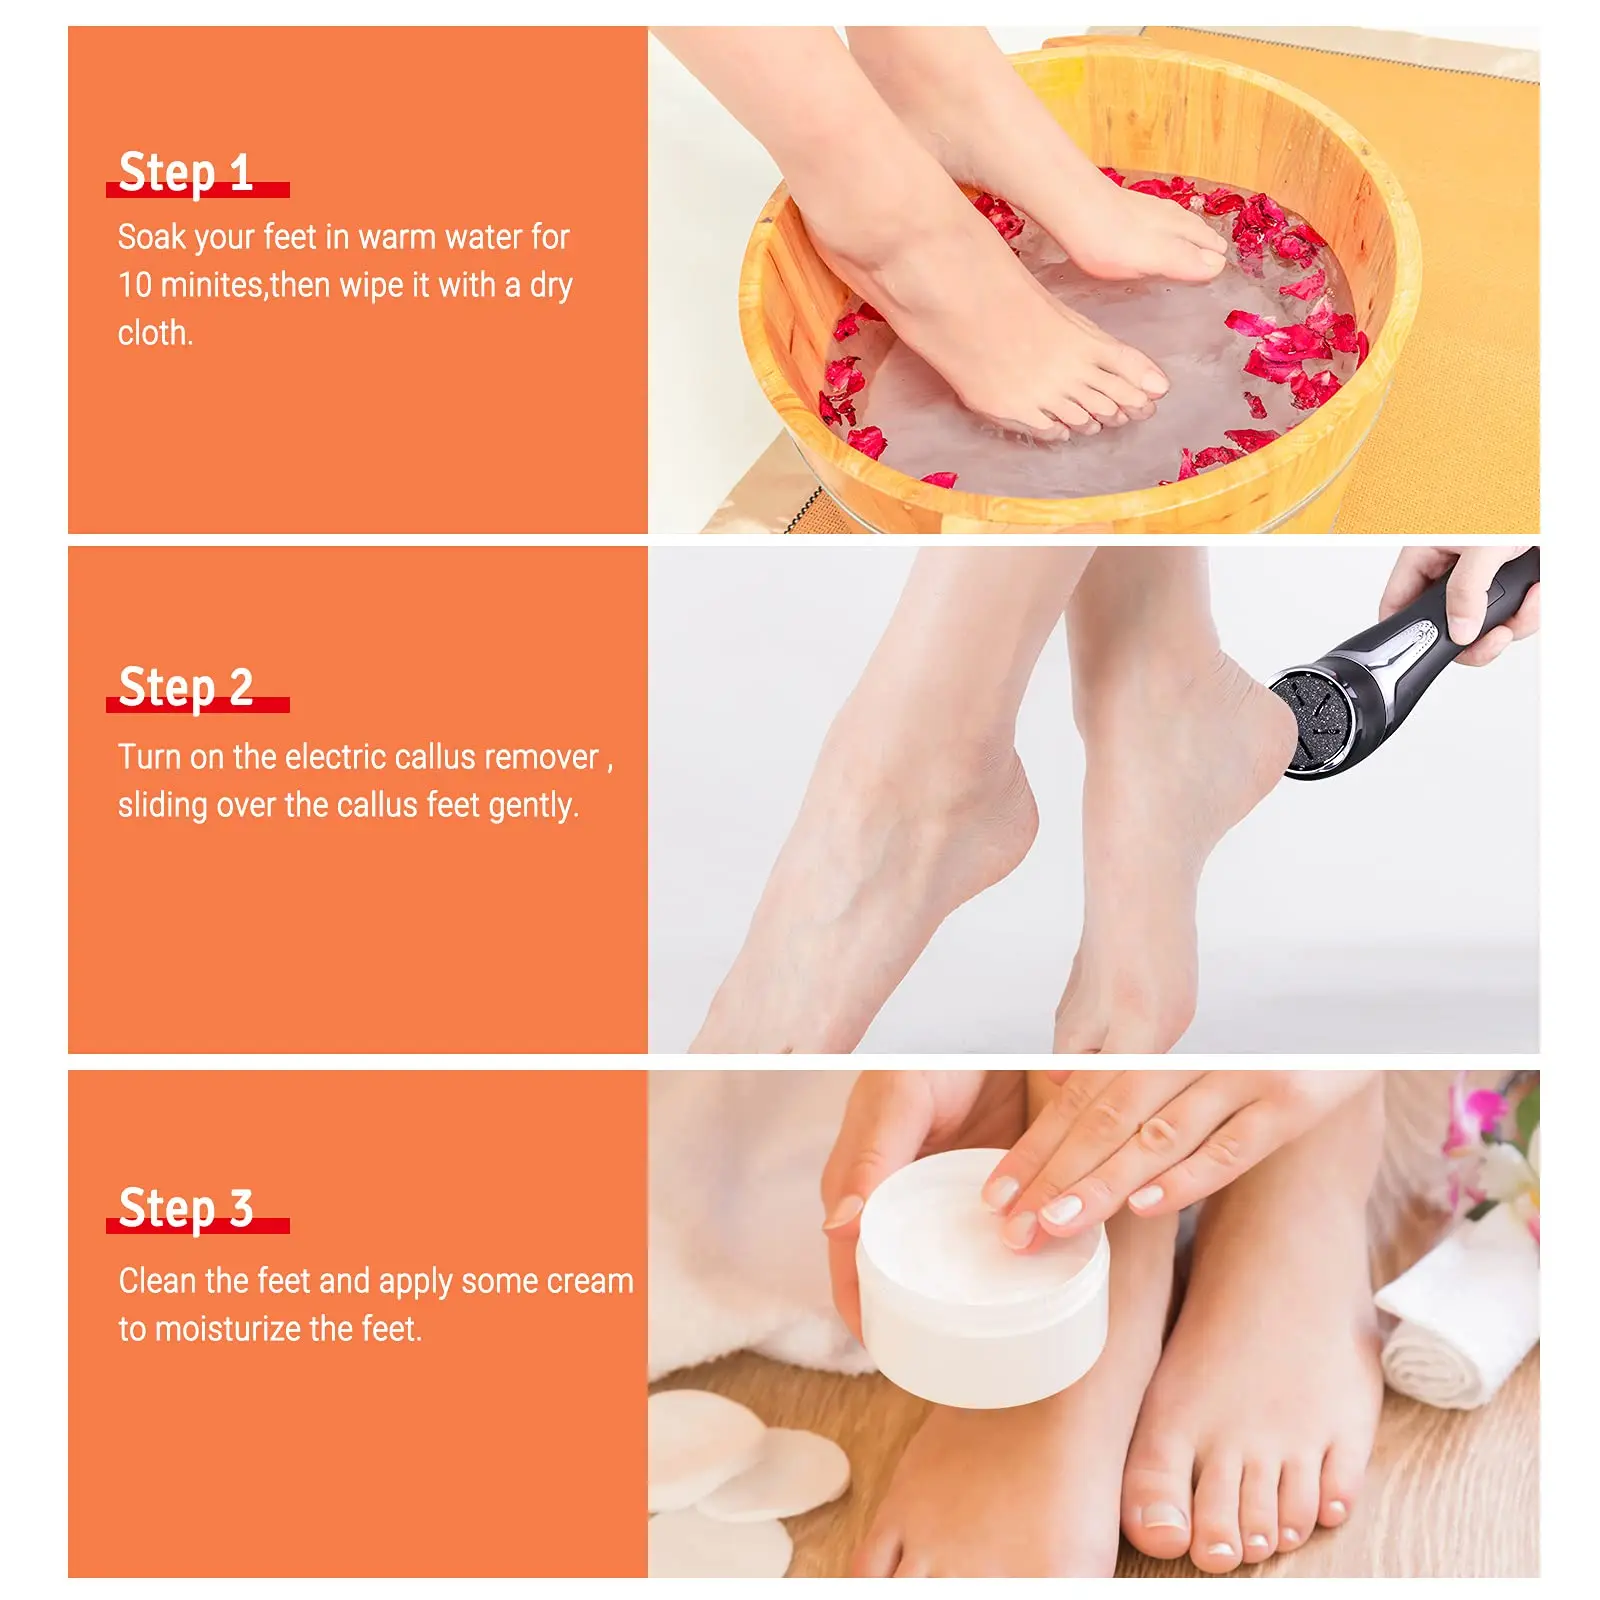 The Benefits of Hot Paraffin Wax: A form of heat therapy effective in  soothing and softening calluses on hands and feet and healing dry cracked  skin,... | By Nailmaynia | Facebook